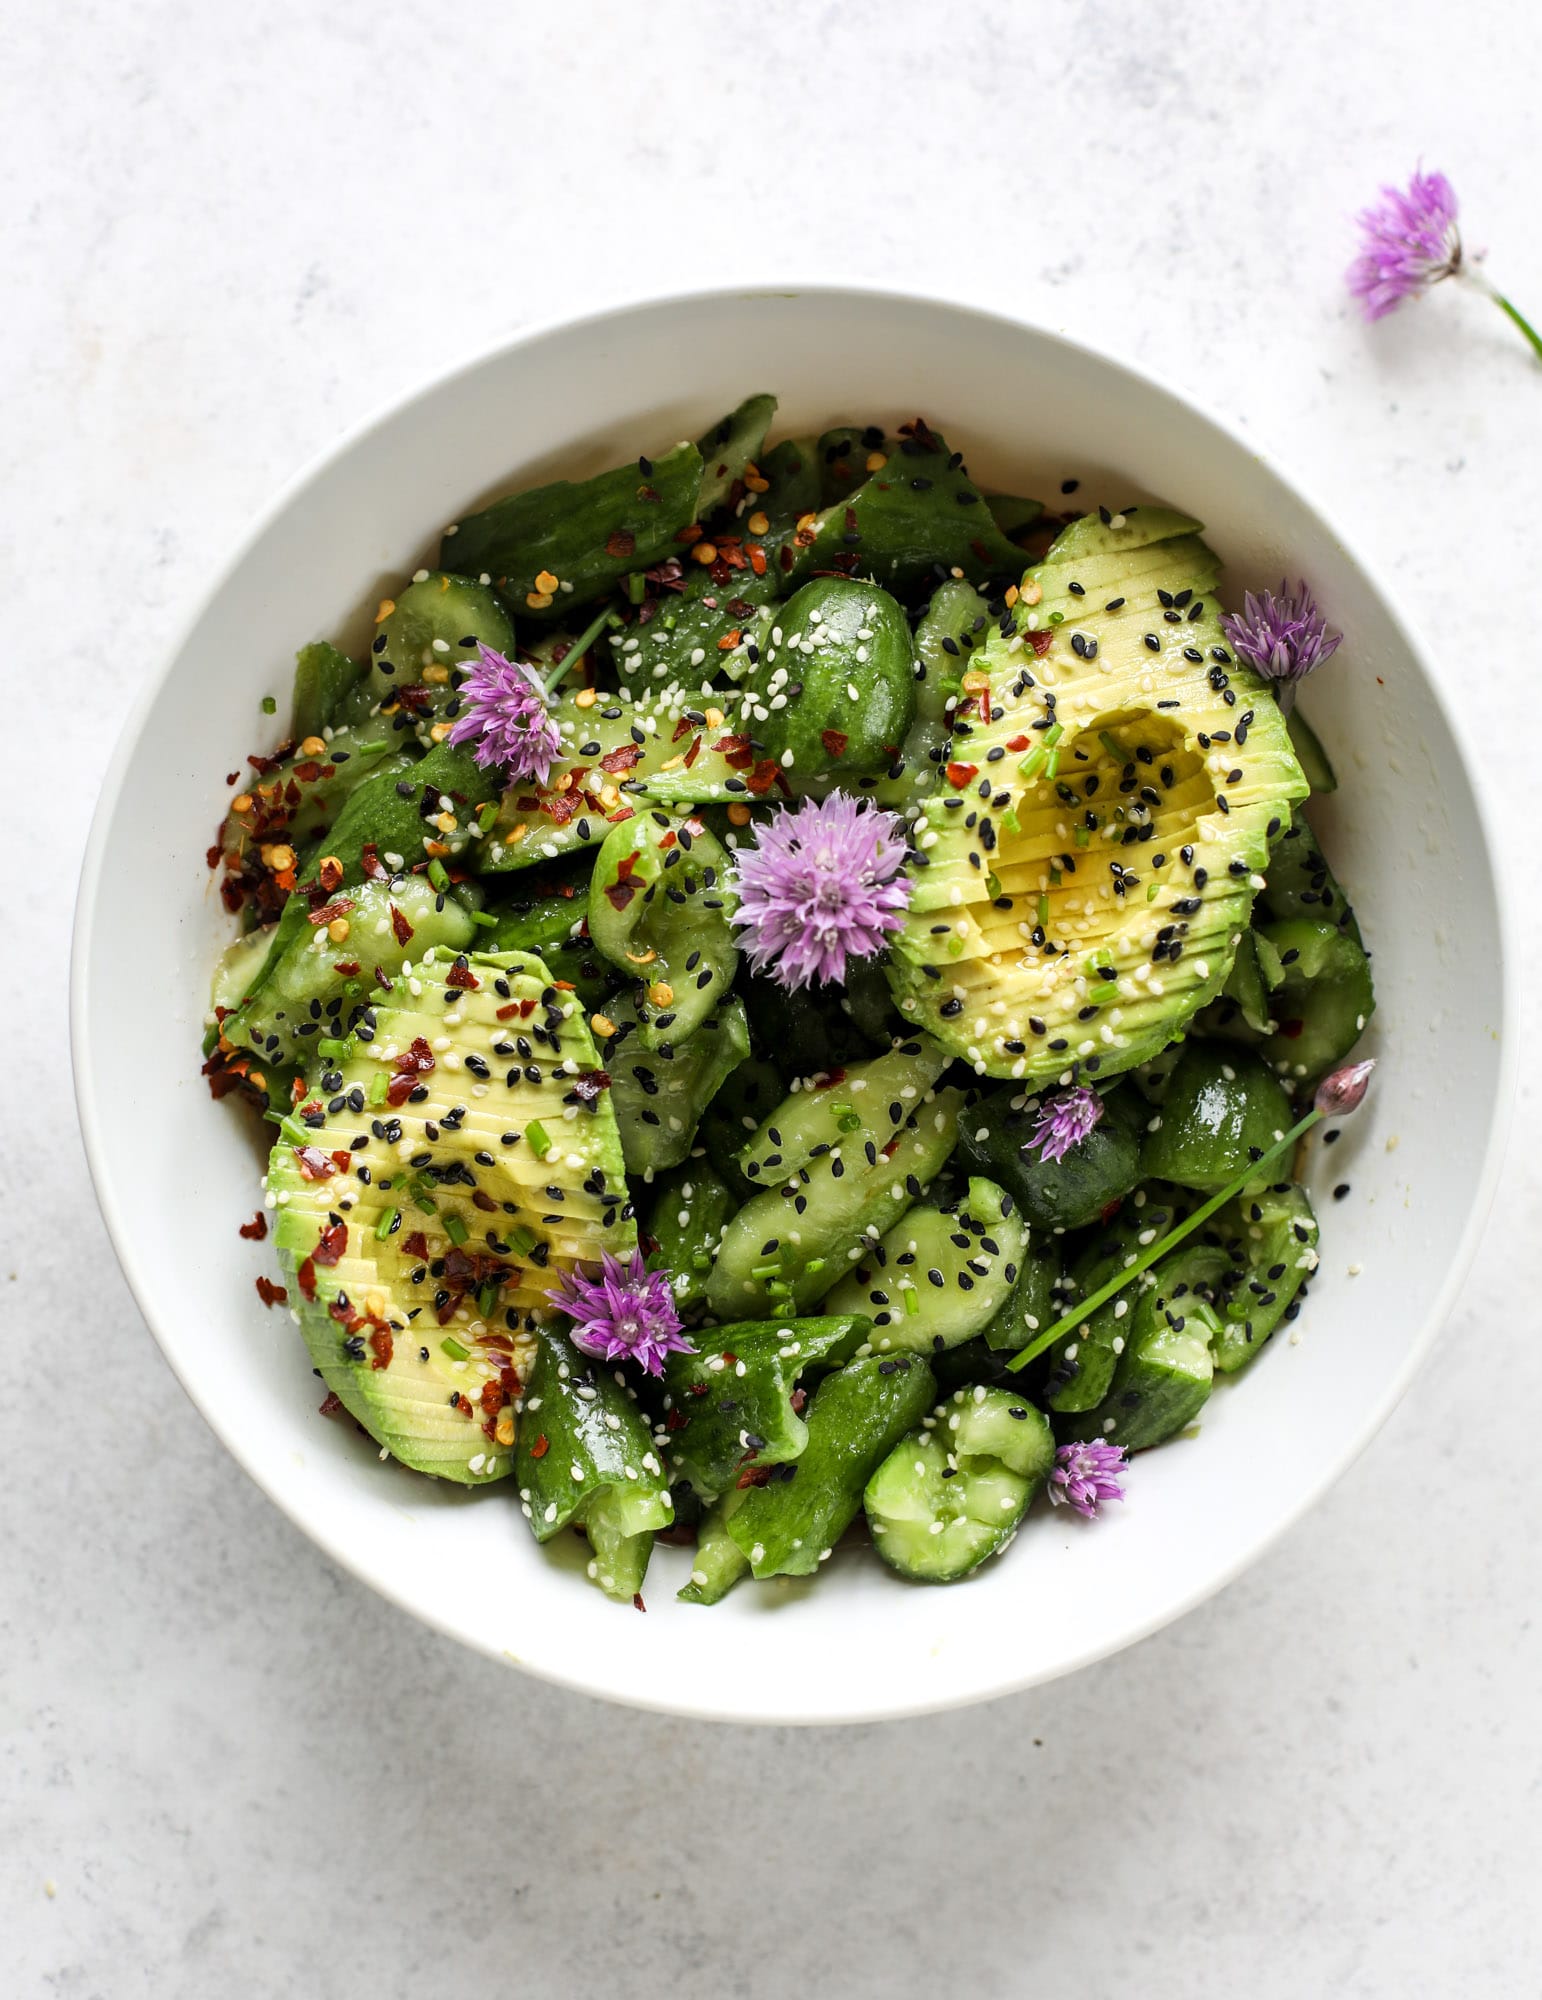 This smashed cucumber salad is so refreshing and perfect for summer! Served with avocado, toasted sesame oil and chives, it's ridiculously flavorful.